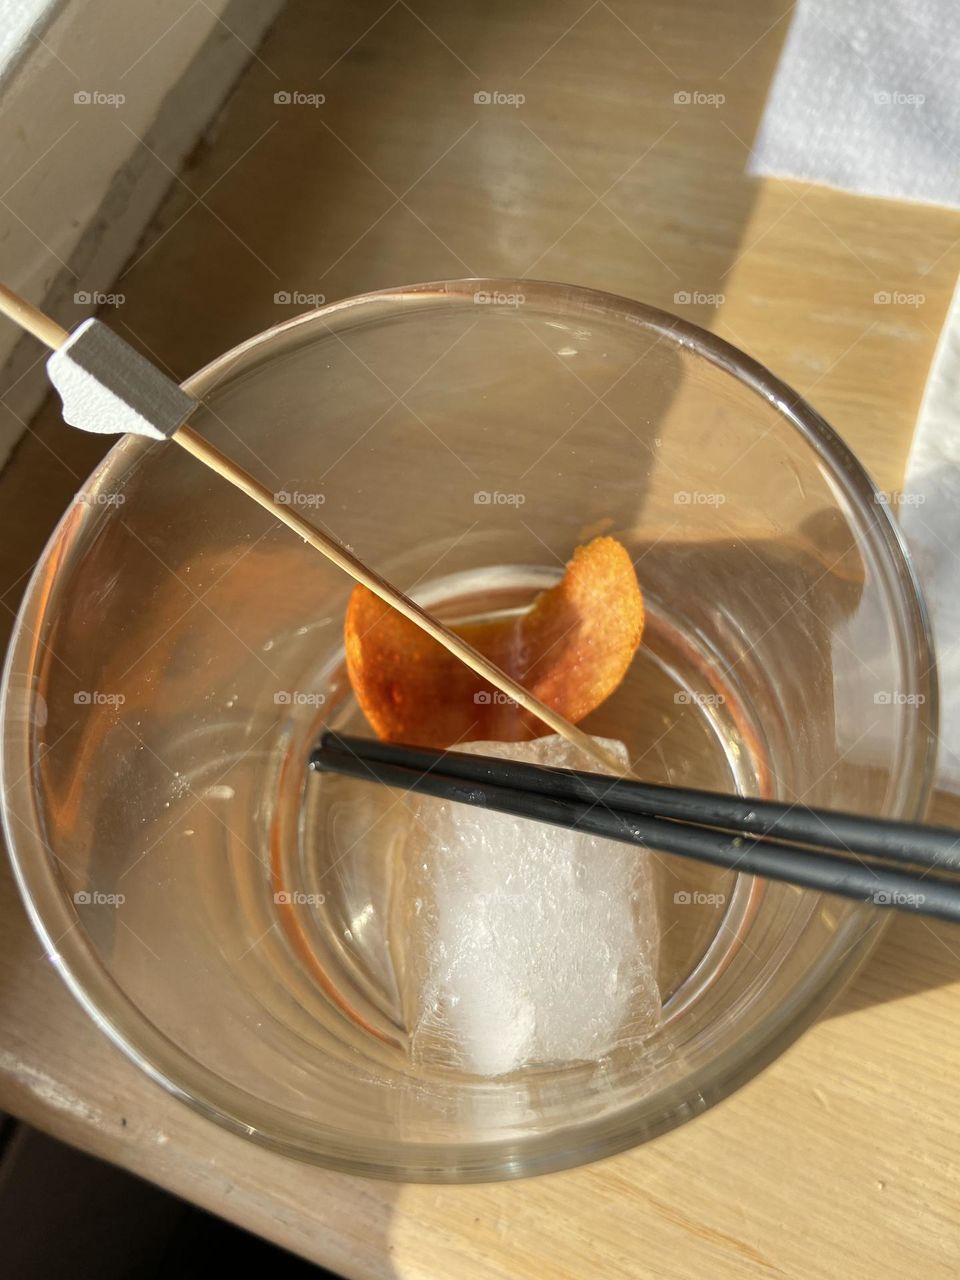 Remnants from a cocktail- ice cube, orange rind, stirrer, and straws in a cocktail glass. 